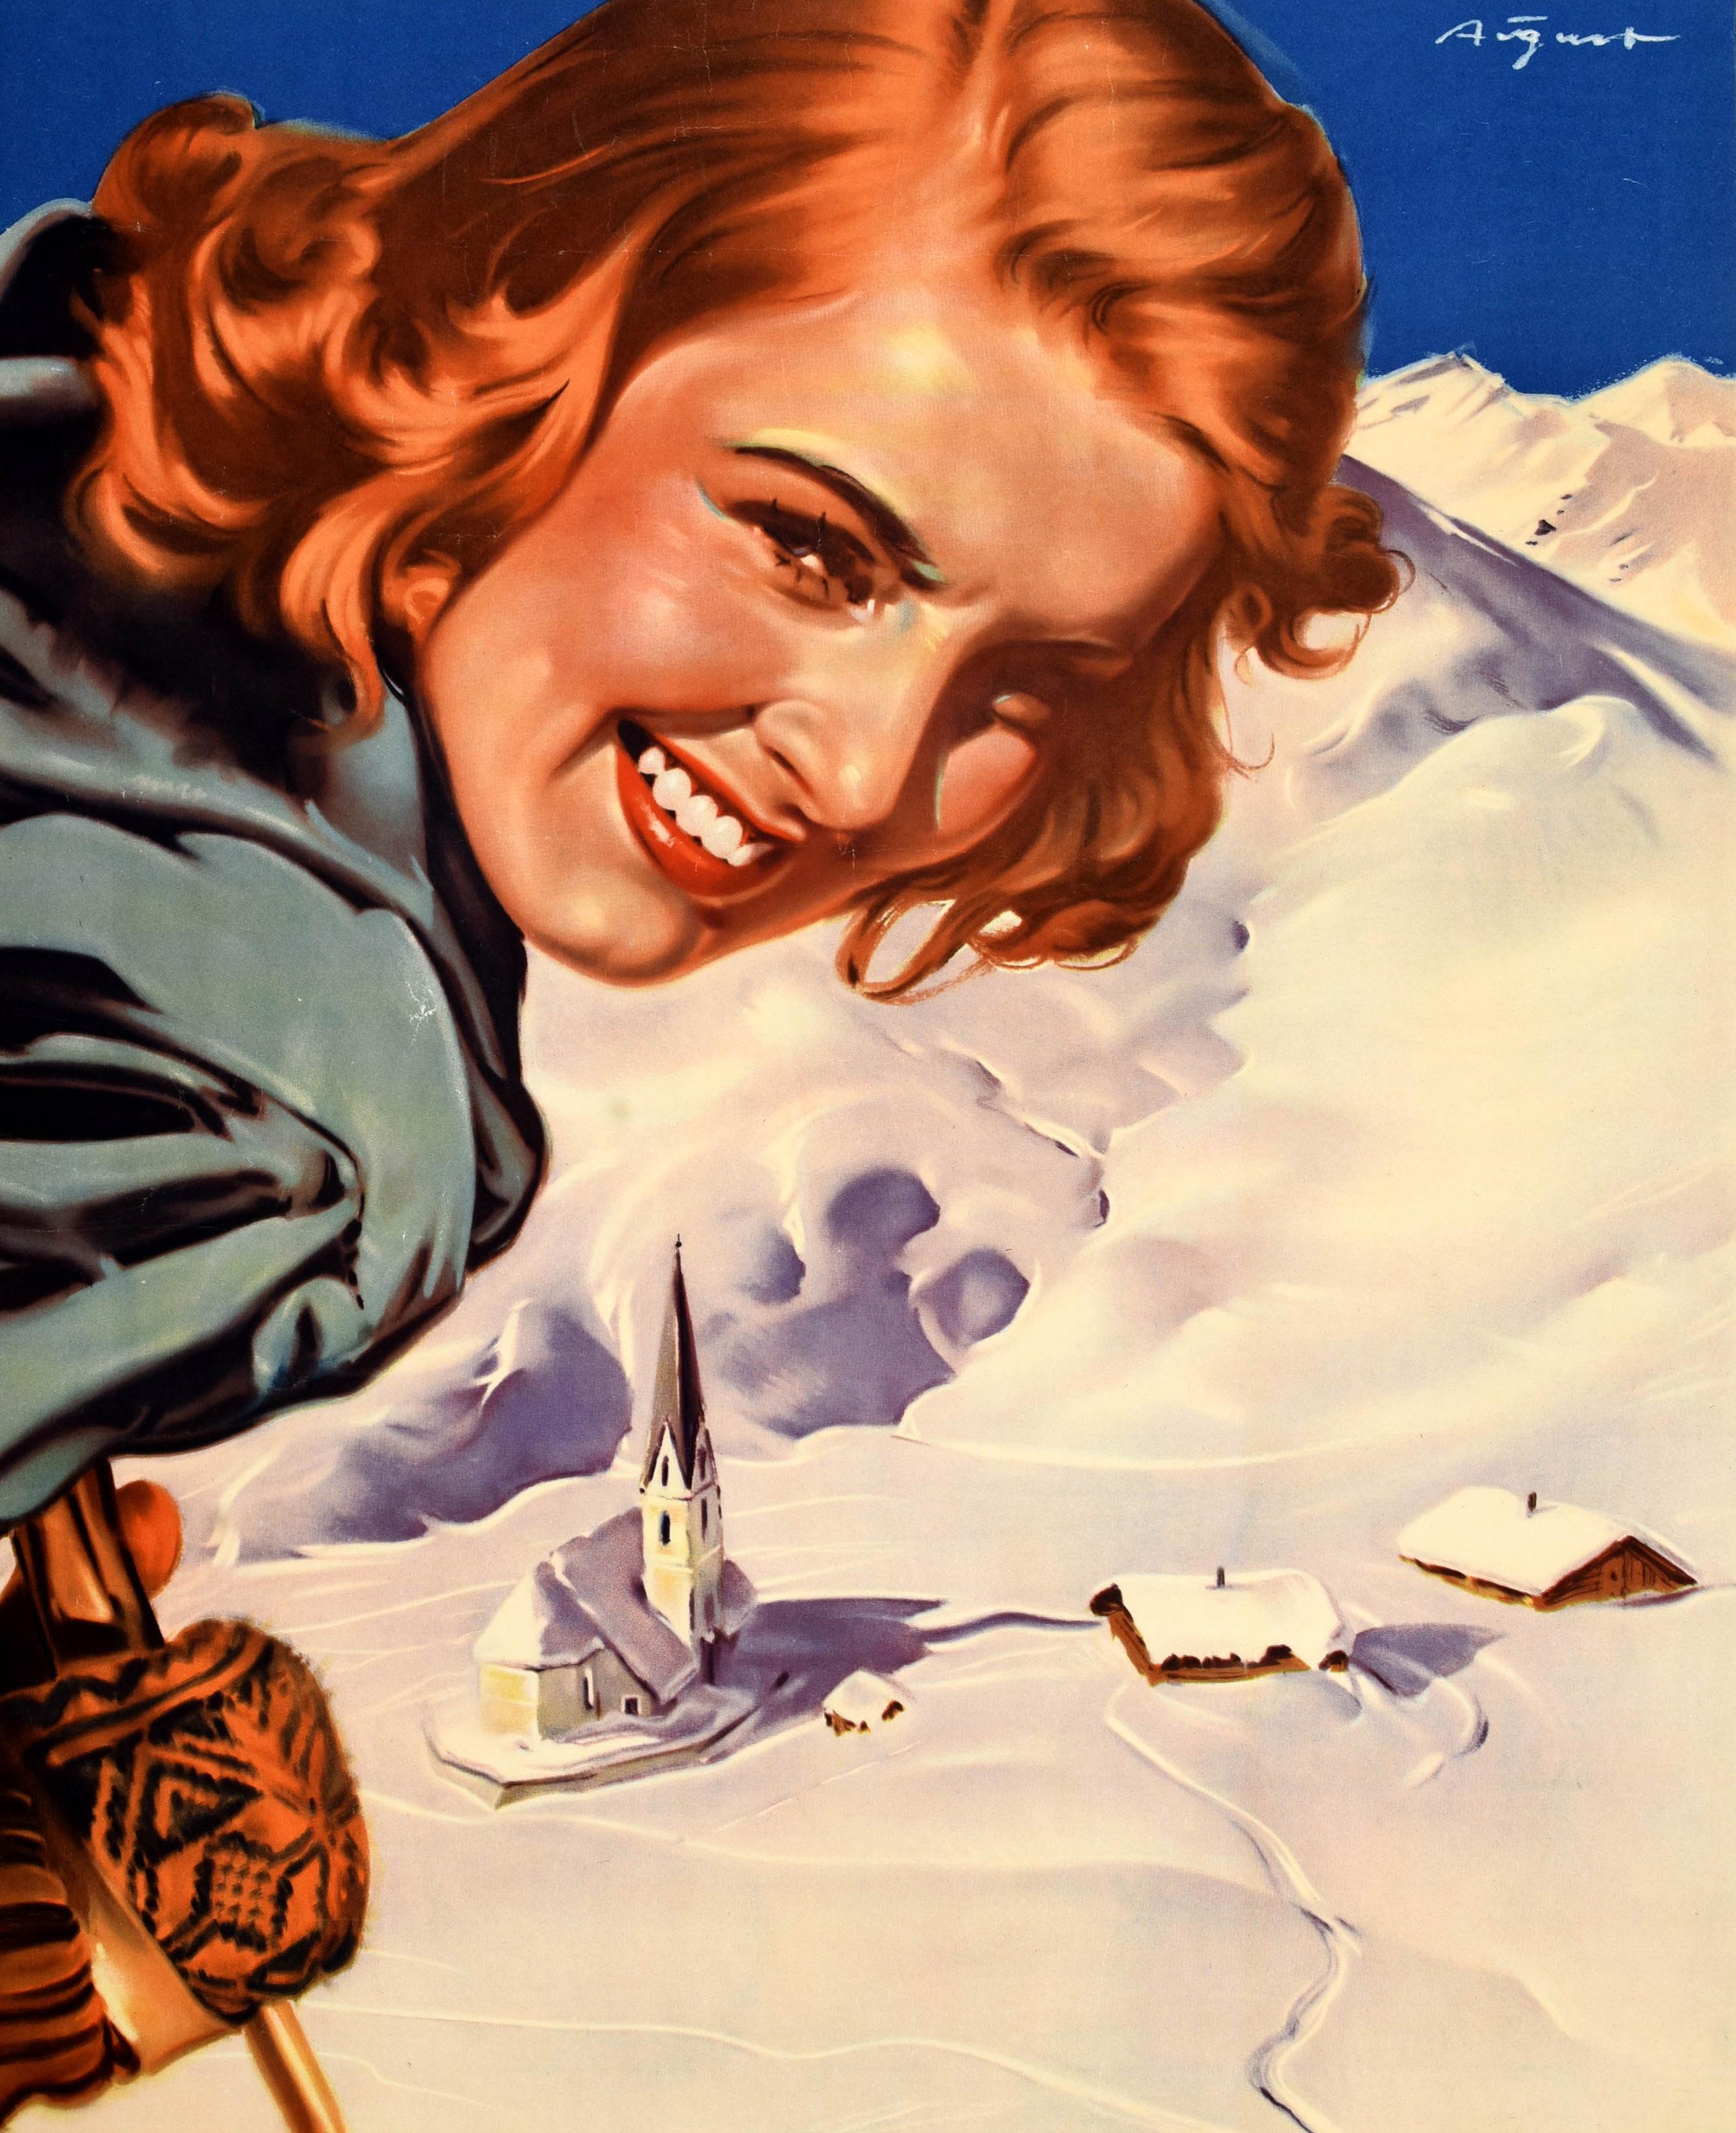 Original vintage skiing travel poster - Winter Sports in Austria - featuring artwork by Paul Aigner (1909-1984) depicting a young lady with brown hair wearing patterned wool mittens and leaning a ski pole smiling at the viewer with snow covered